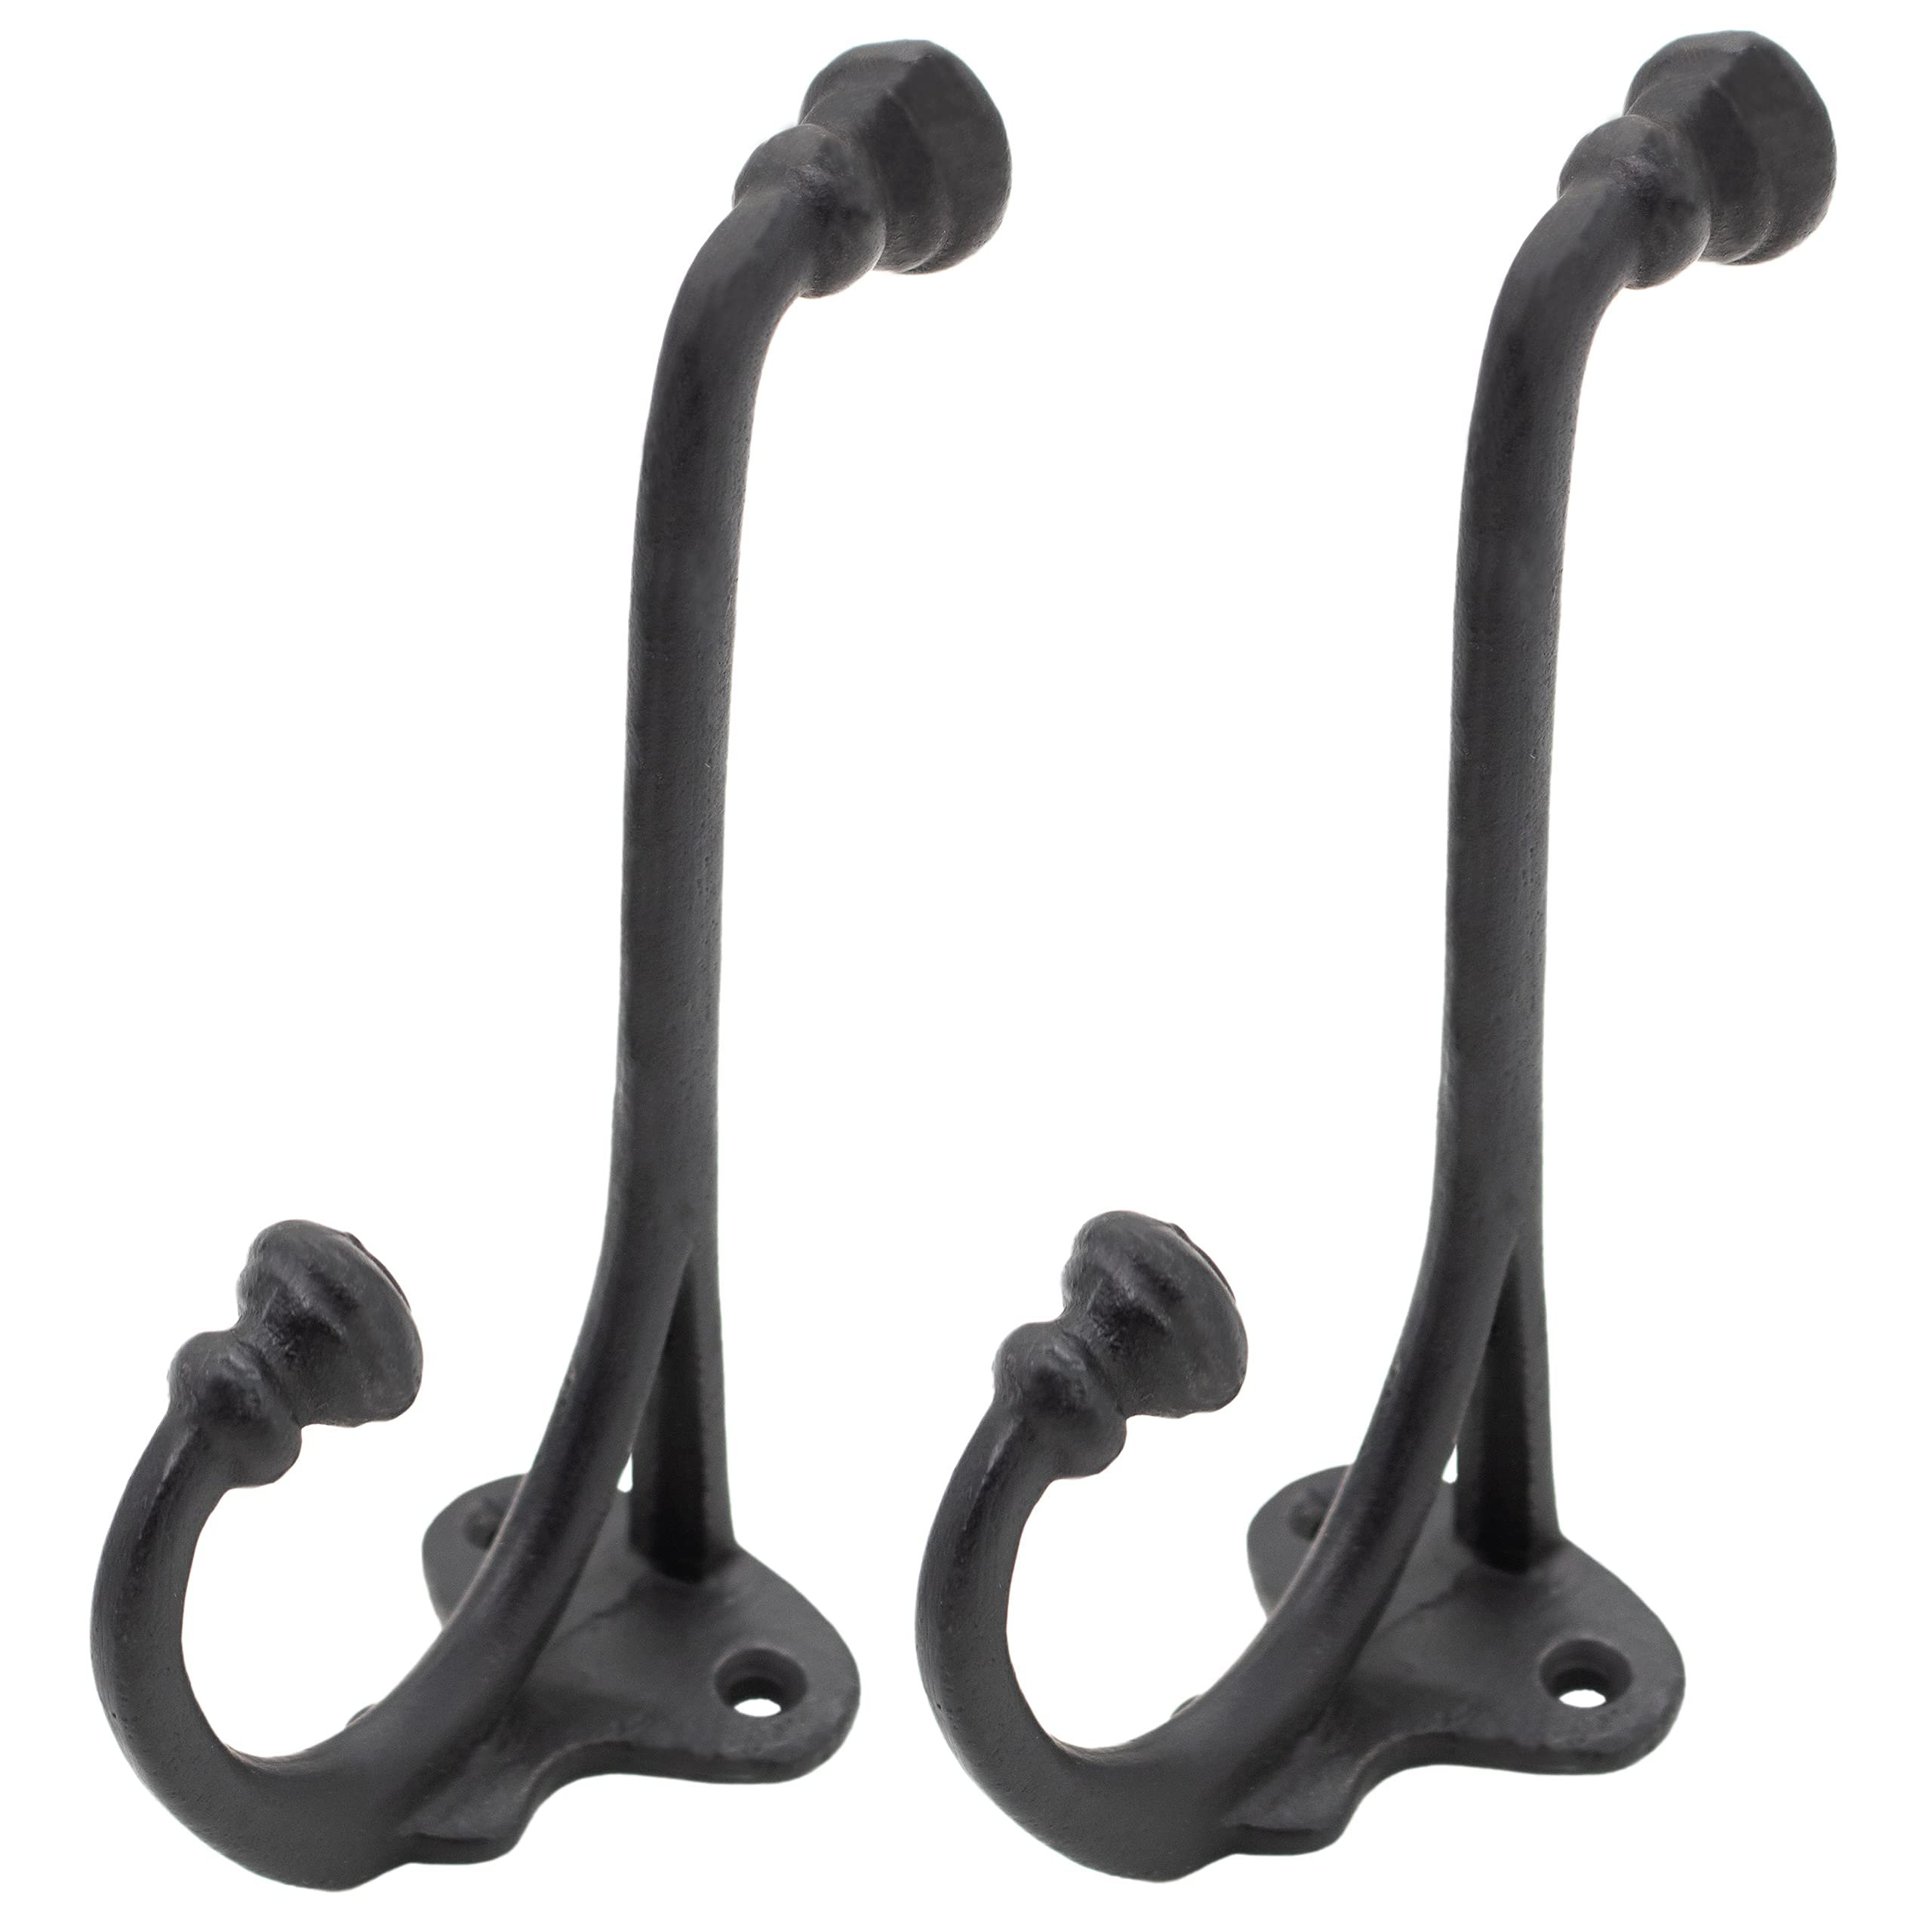 Set of 2 Antique-style Double Rustic Coat Hook Cast Iron Wall